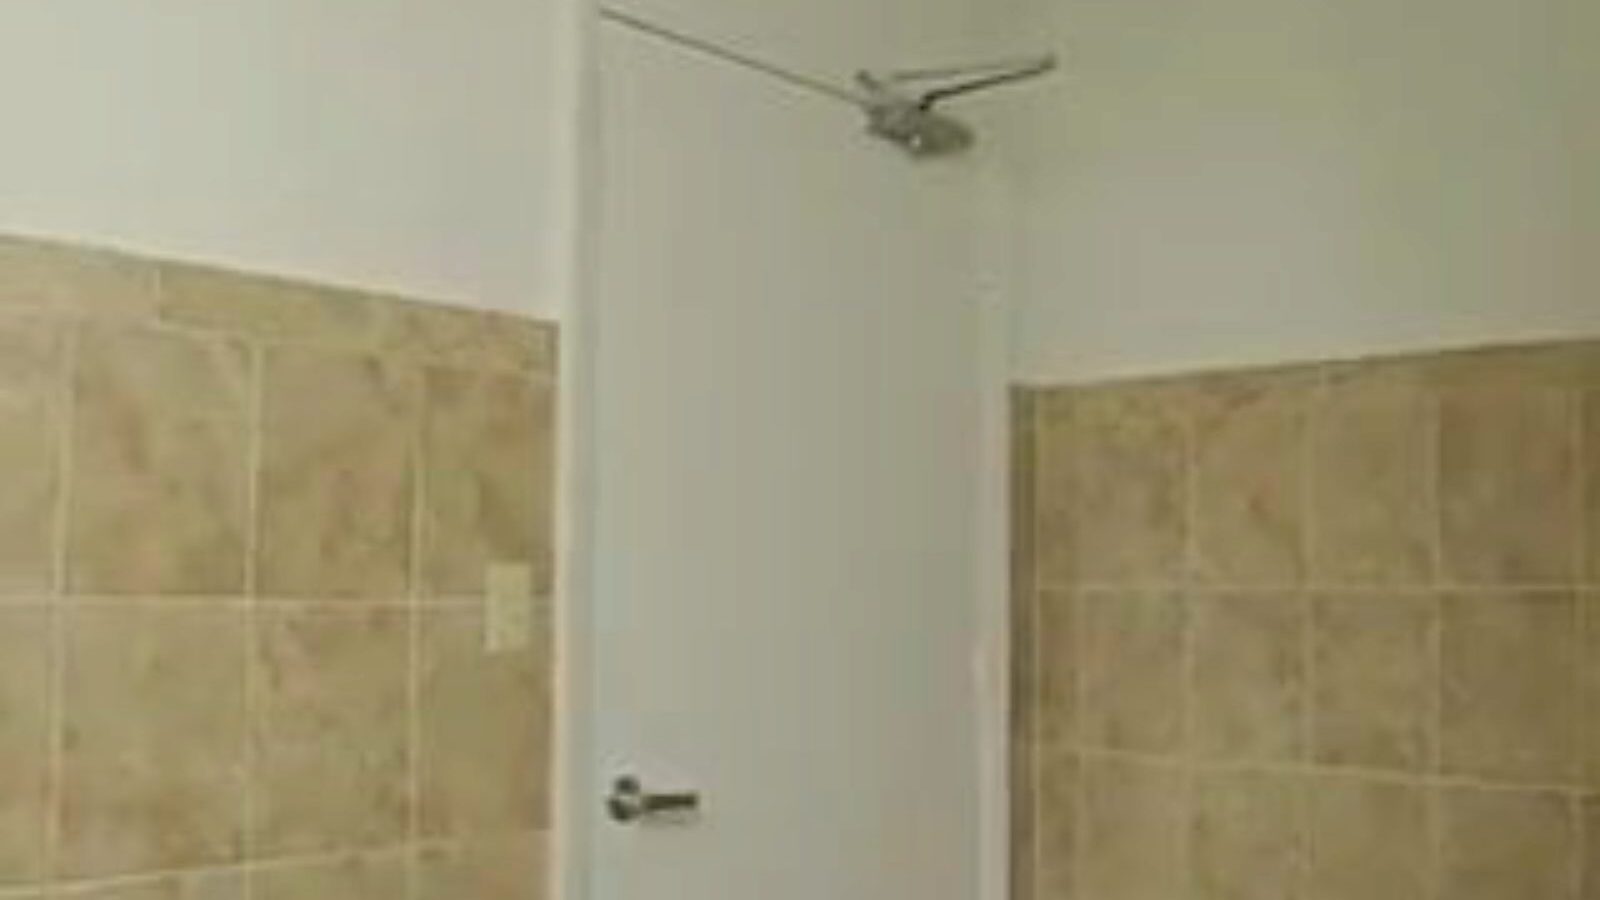 Office Floozy Fuck in the Throne Room, Free Office Xnxx Porn Movie See Office Bitch Fuck in the Lavatory video on xHamster, the greatest hook-up tube website with tons of free-for-all Office Xnxx Free Floozy & U Free pornography clips